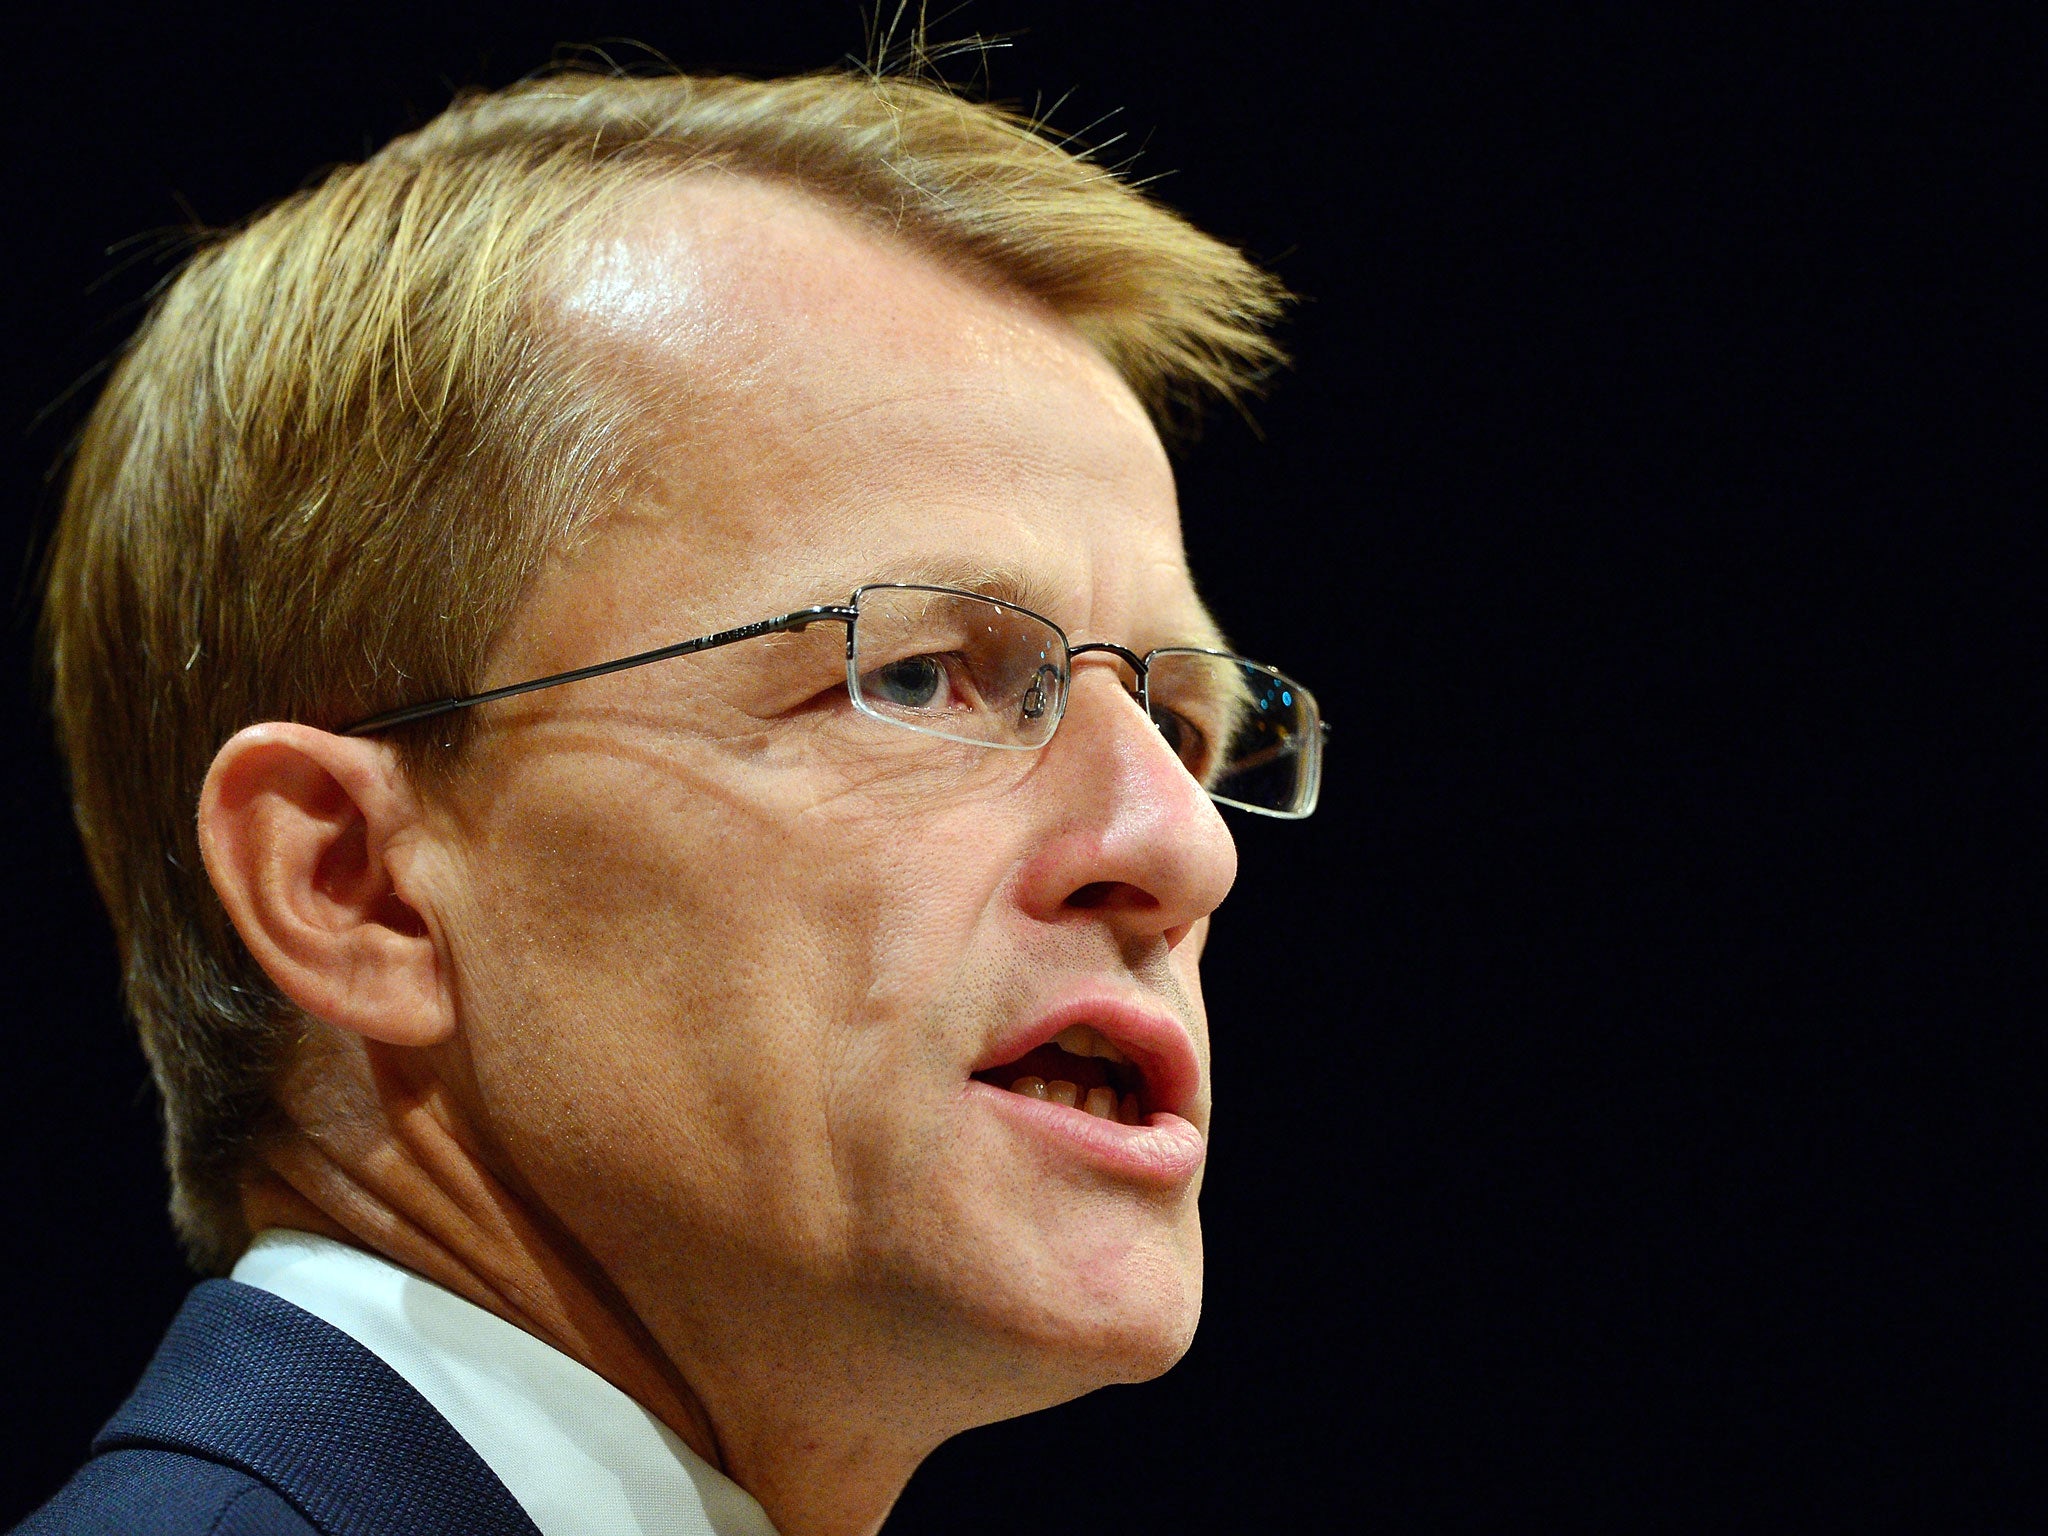 David Laws, former Schools and Education Minister